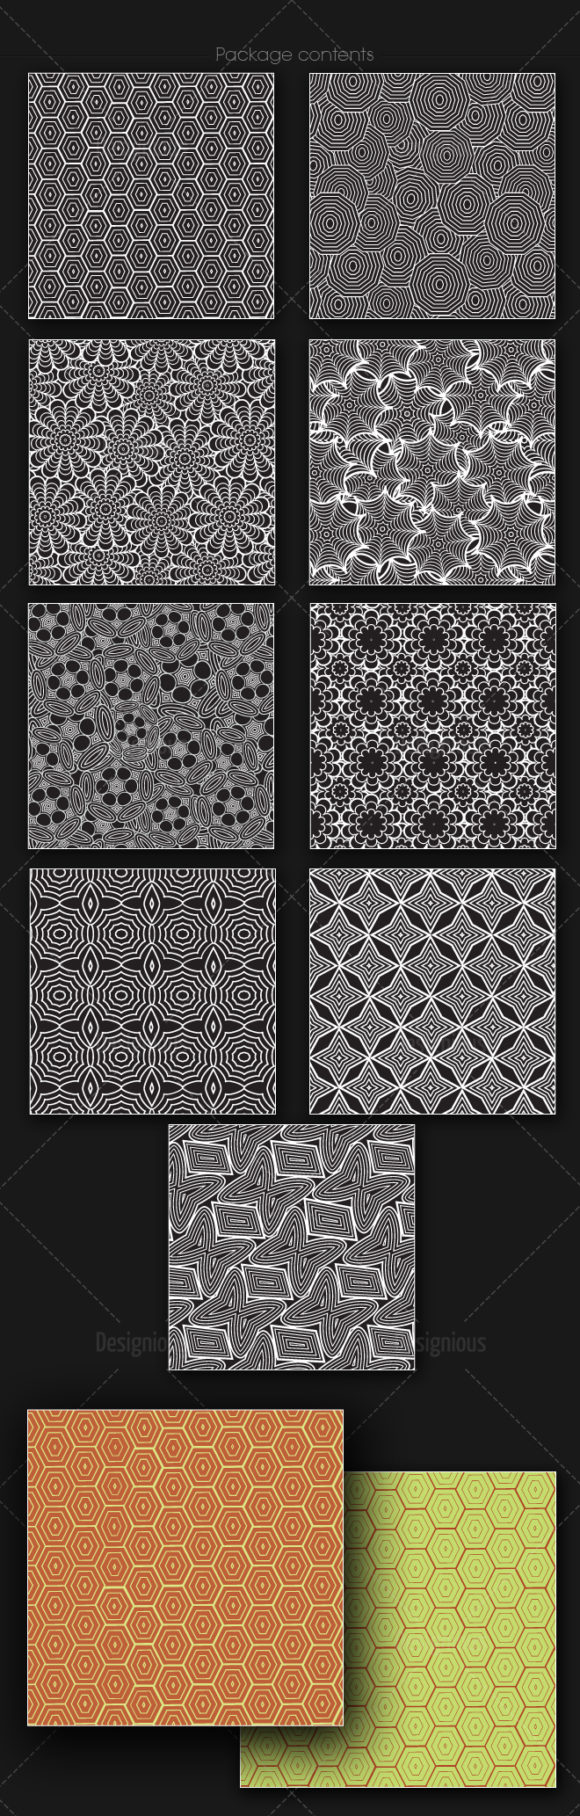 Seamless Patterns Vector Pack 165 2